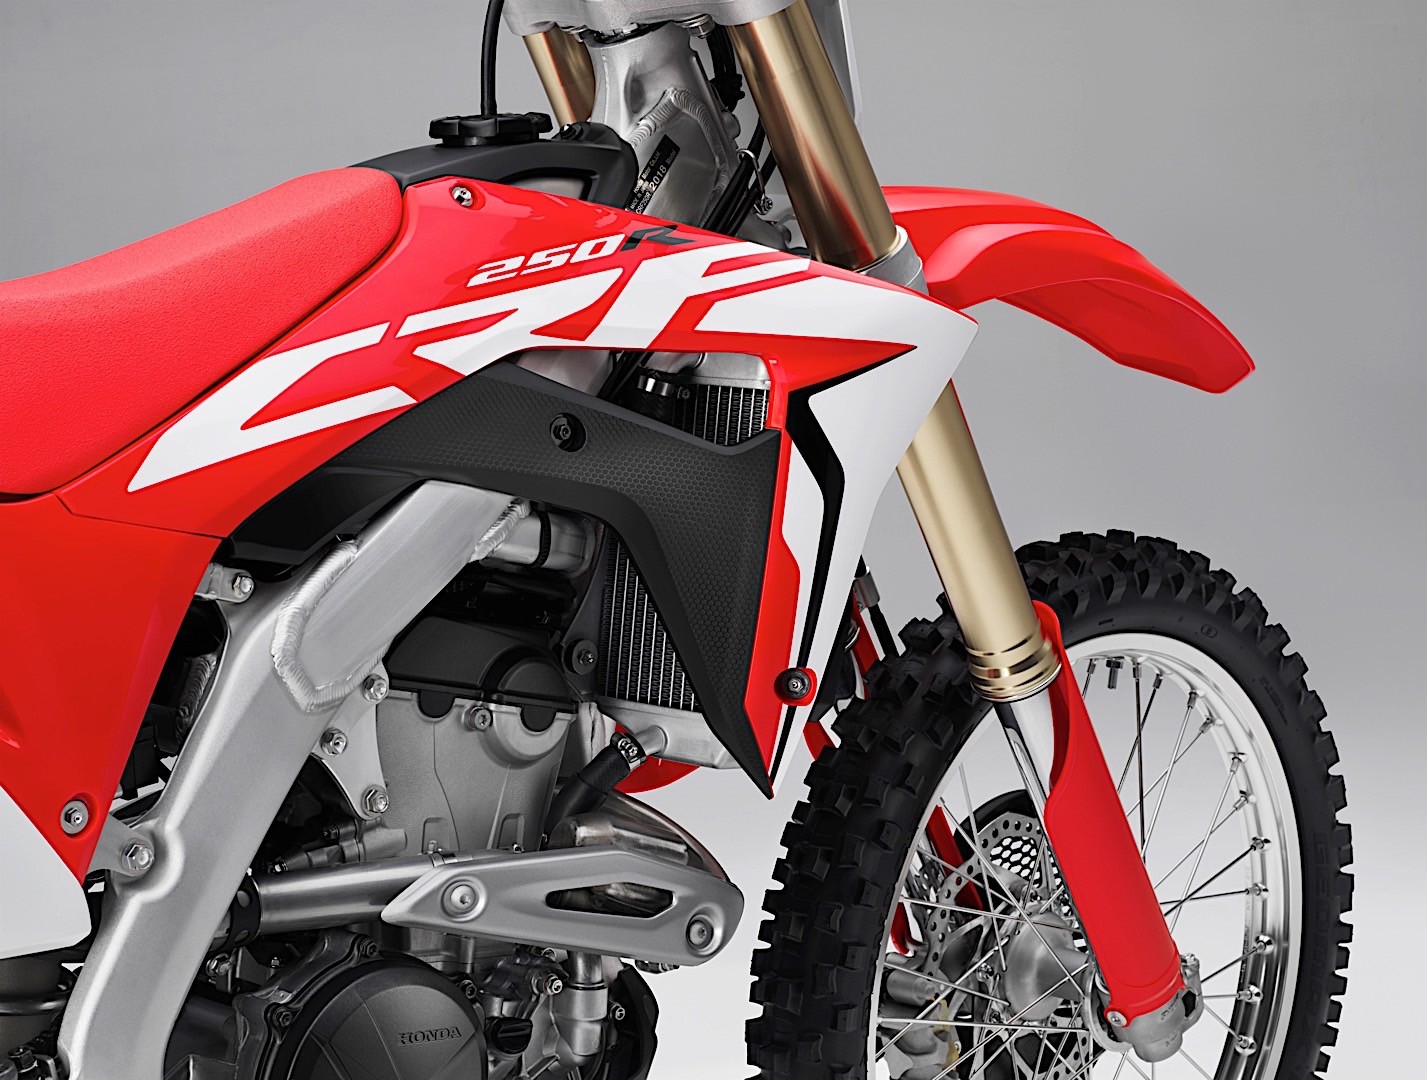 2018 Honda Crf250r Gets New Engine With Better Top End Power